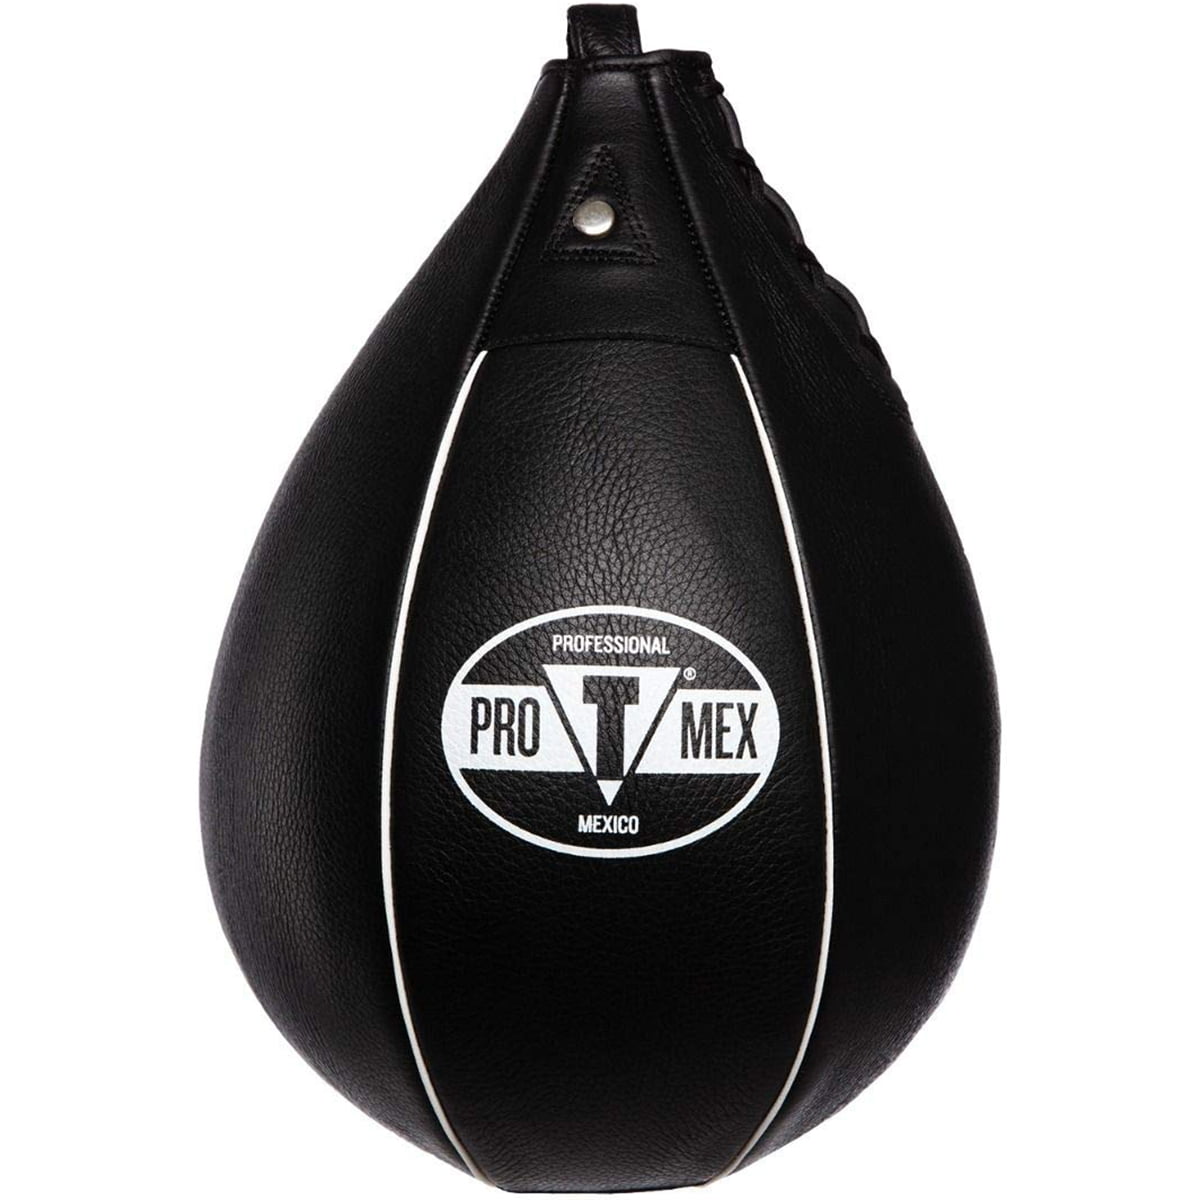 New Boxing Speed Bag 10" x 7" inch 5 lbs pounds Punching Training MMA black 